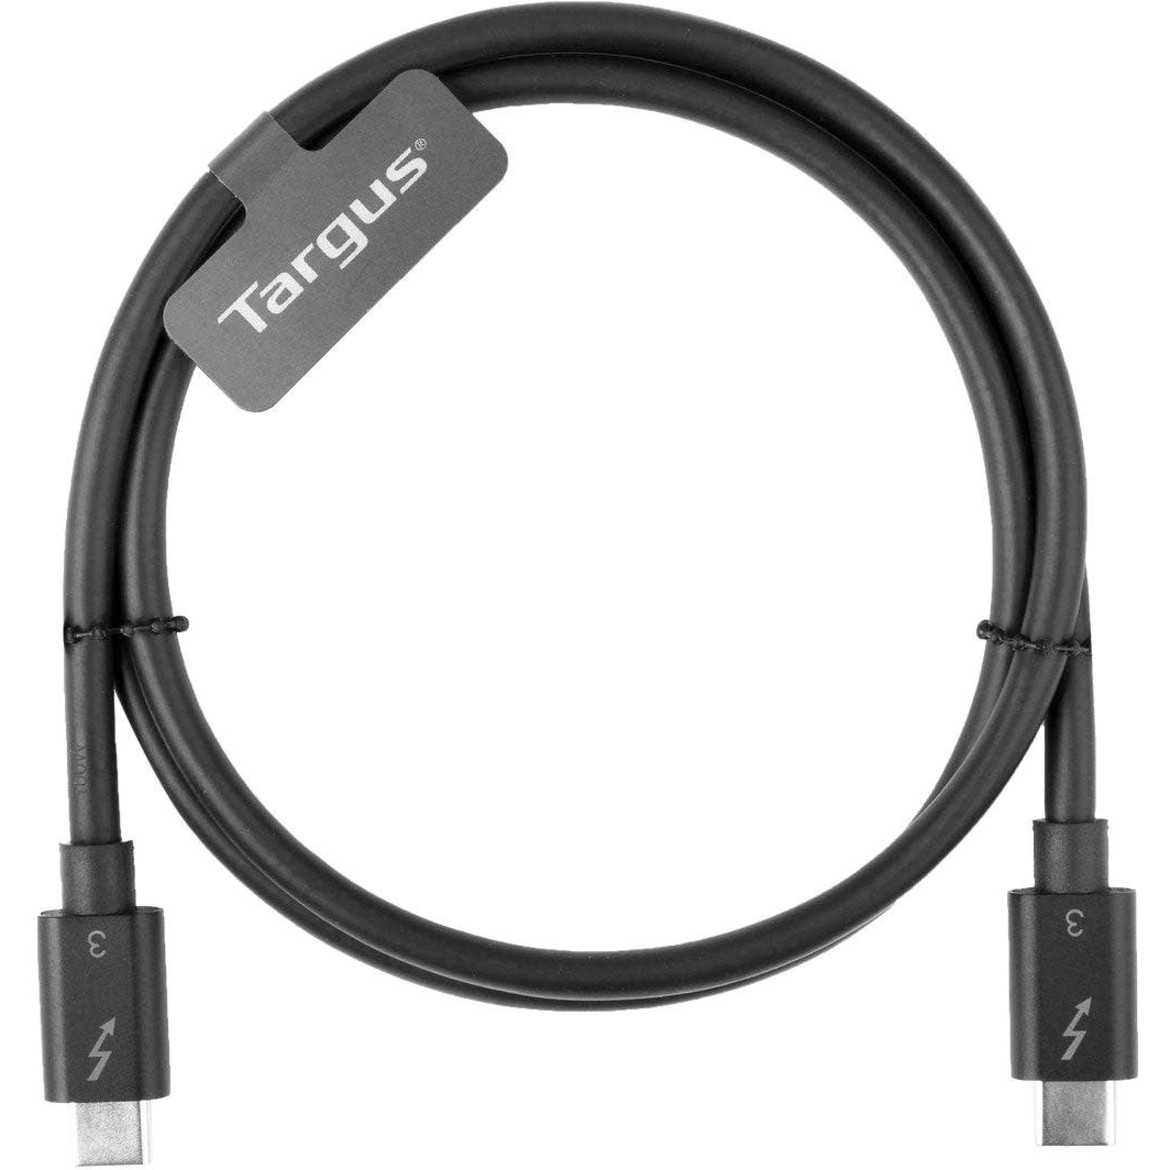 Targus 0.8M USB-C Male to USB-C Male Thunderbolt 3 40Gbps Cable2.62 ft Thunderbolt 3 Data Transfer Cable for Docking Station, Peripheral D… ACC1128GLX